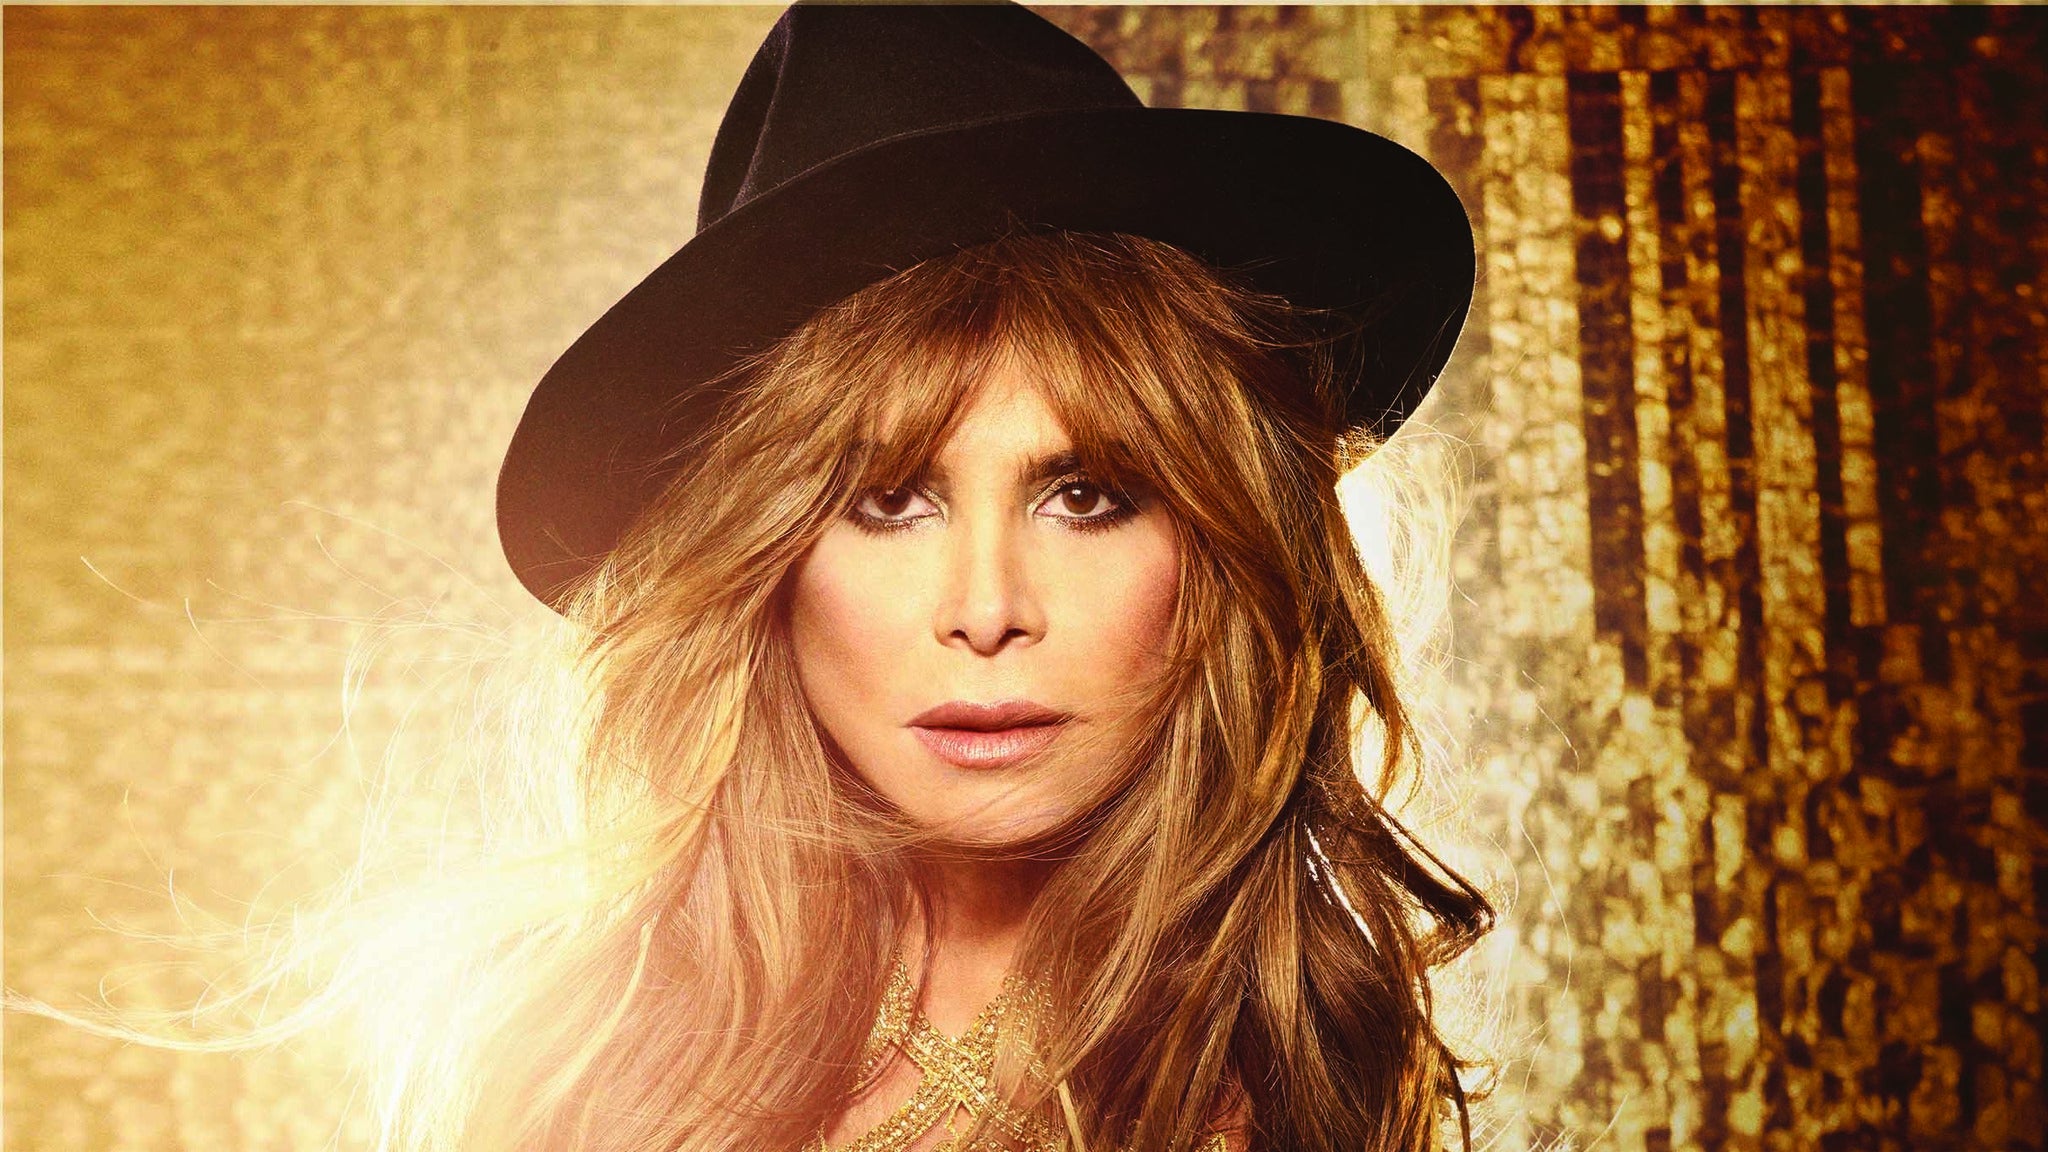 Paula Abdul: STRAIGHT UP PAULA! in New Buffalo promo photo for VIP Package presale offer code